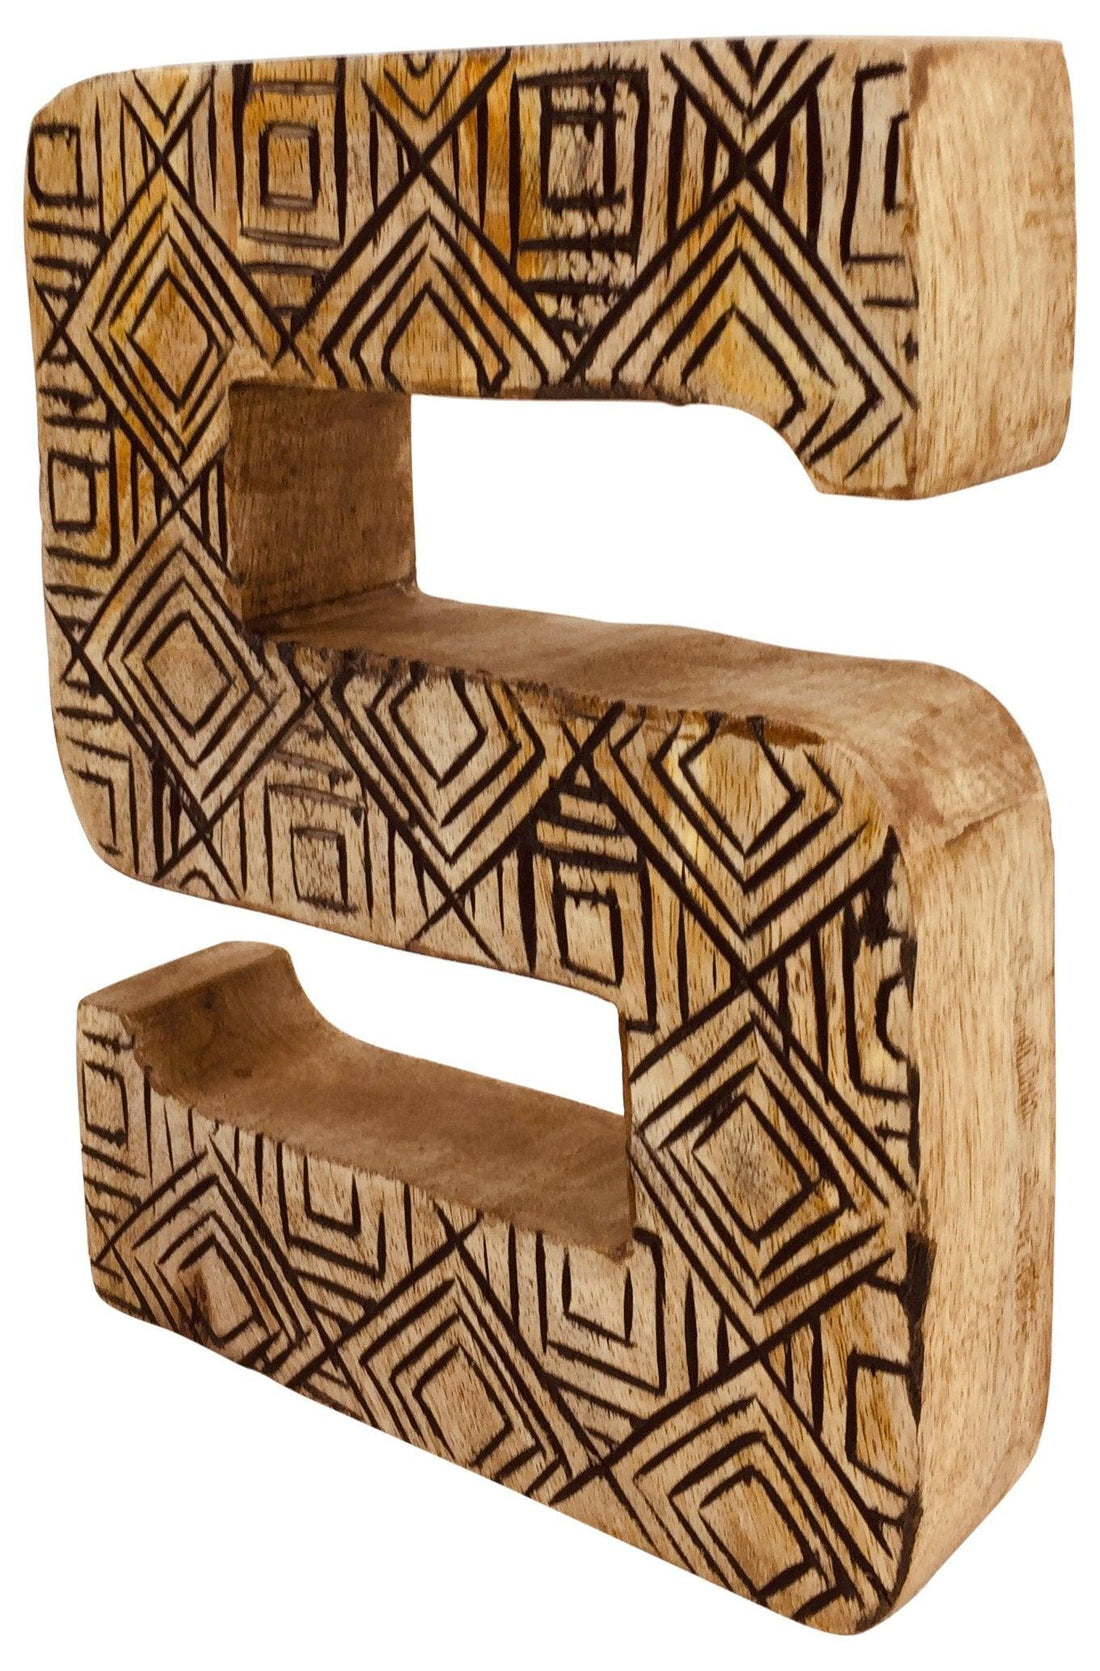 Hand Carved Wooden Geometric Letter S - £12.99 - Single Letters 